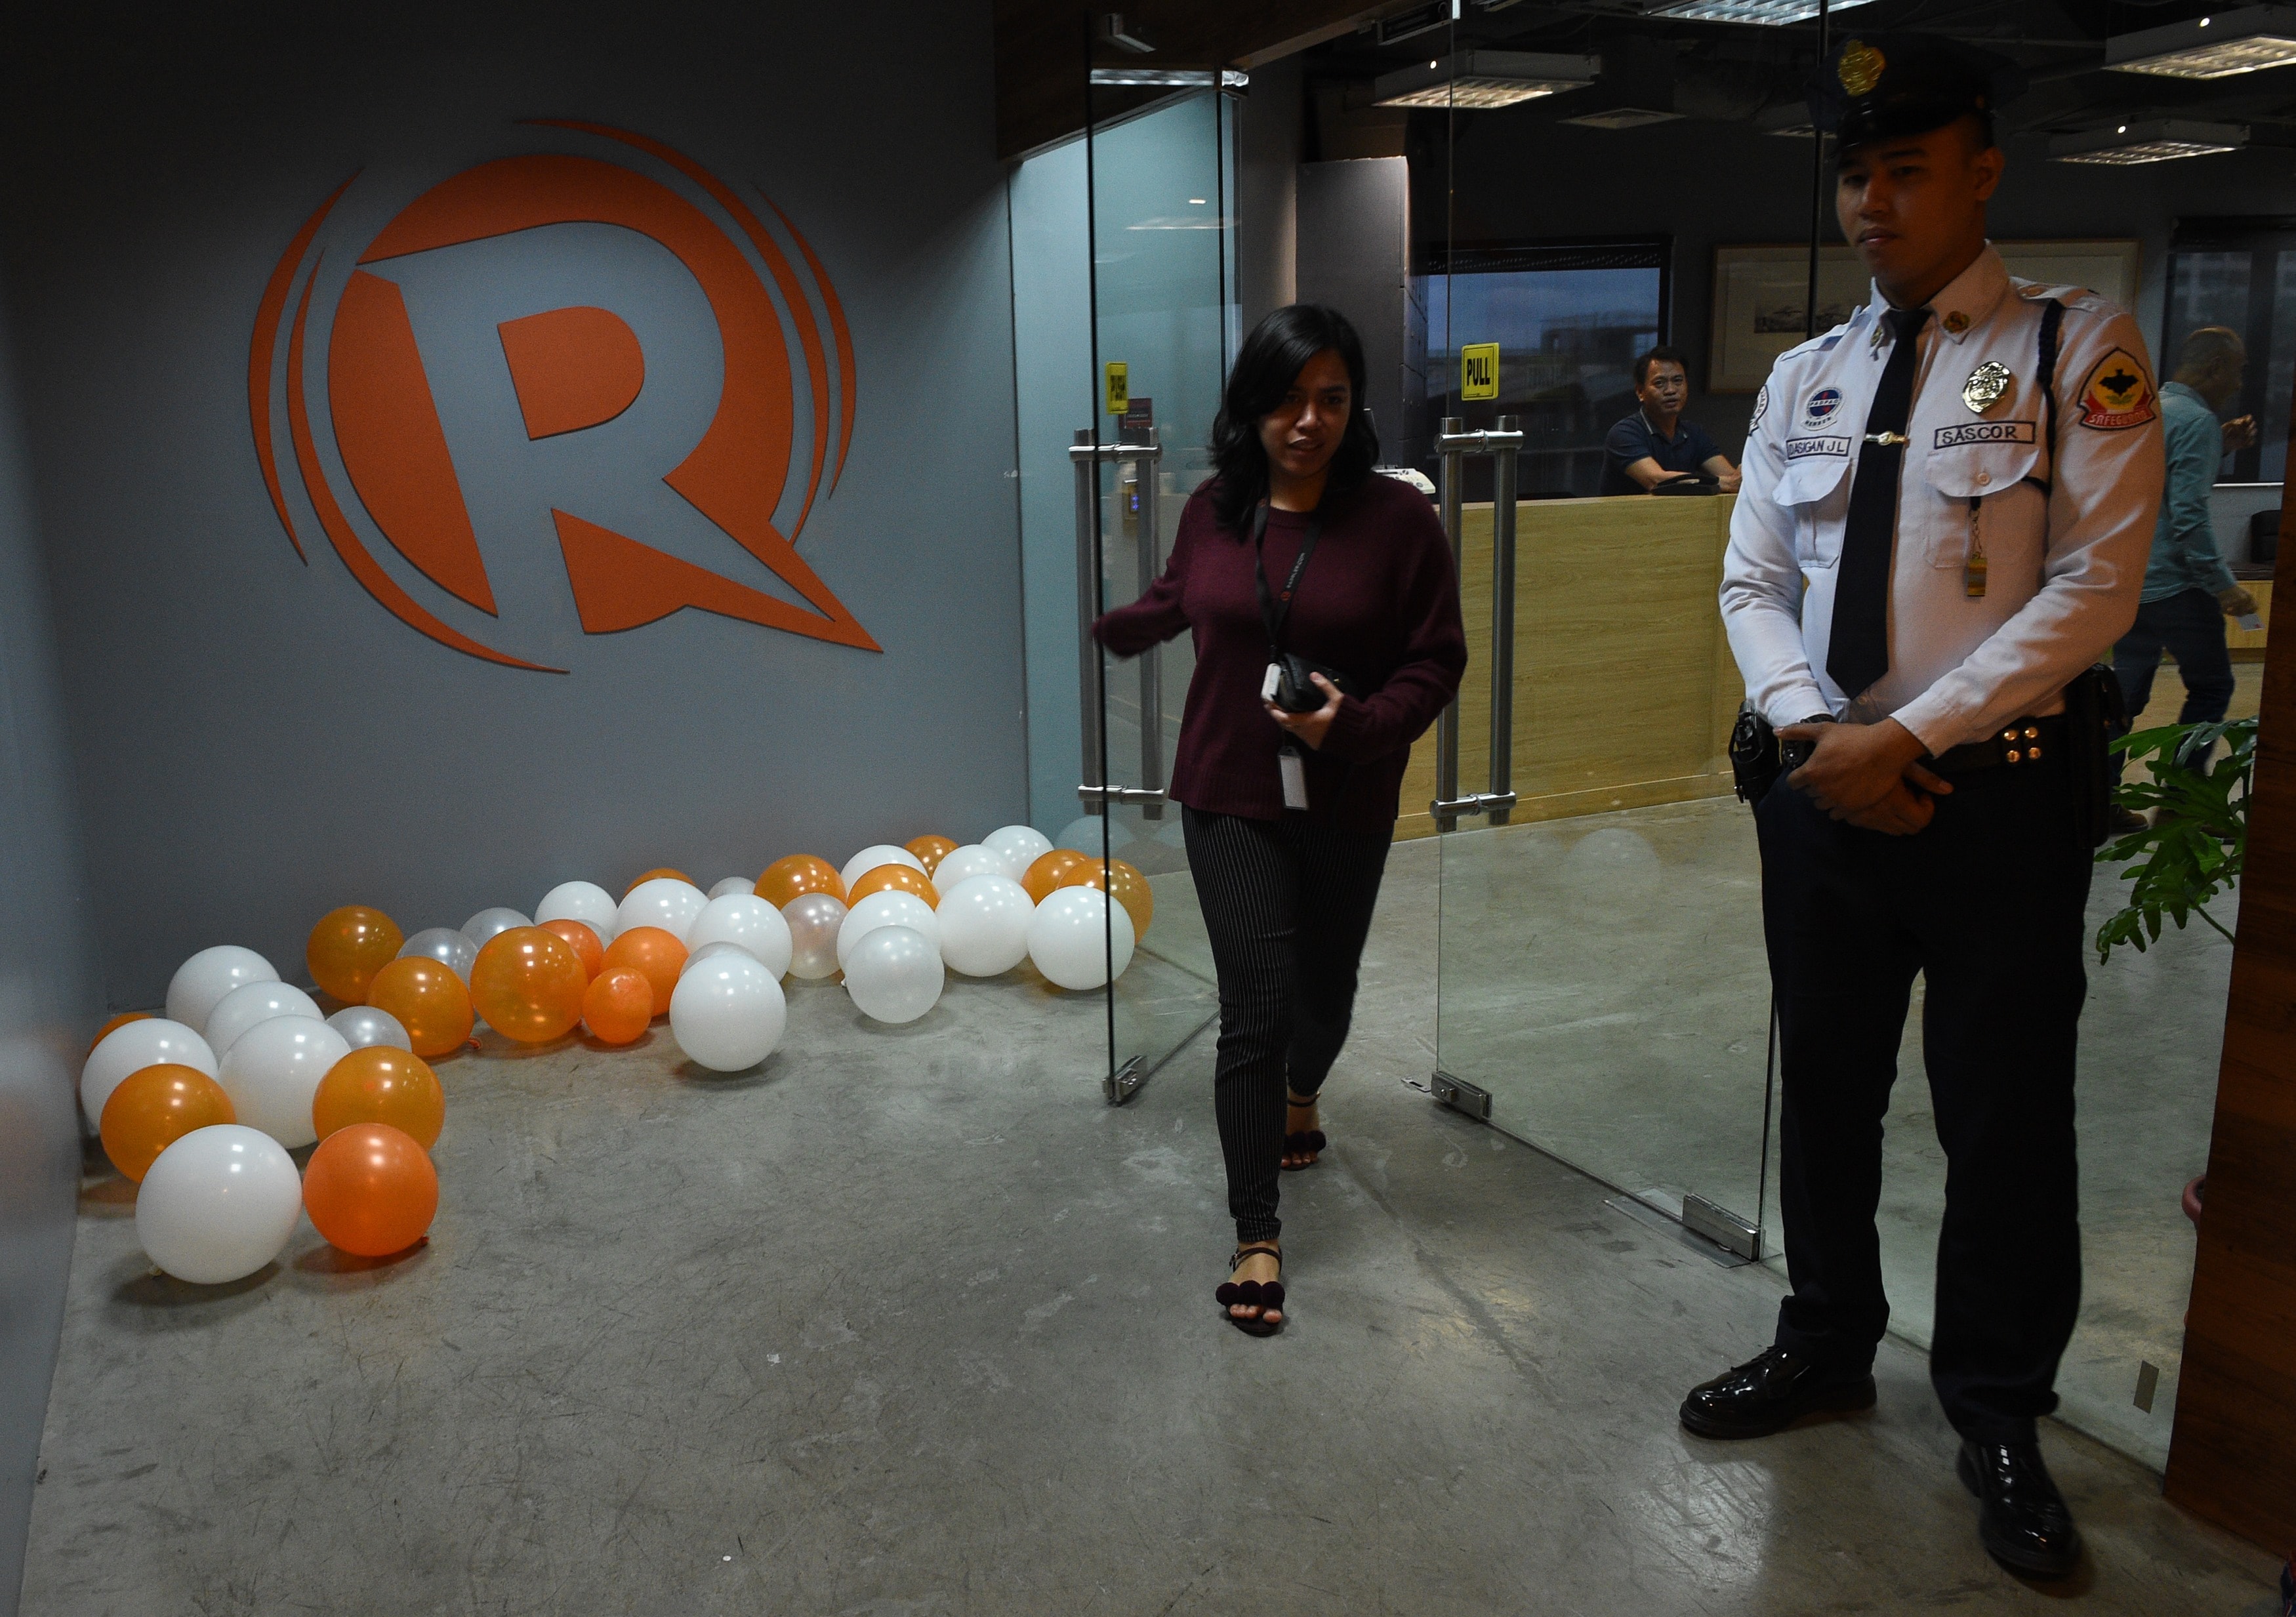 A Rappler employee heads out of their editorial office in Manila on January 15, 2018, after the news site's operating license was revoked, TED ALJIBE/AFP/Getty Images